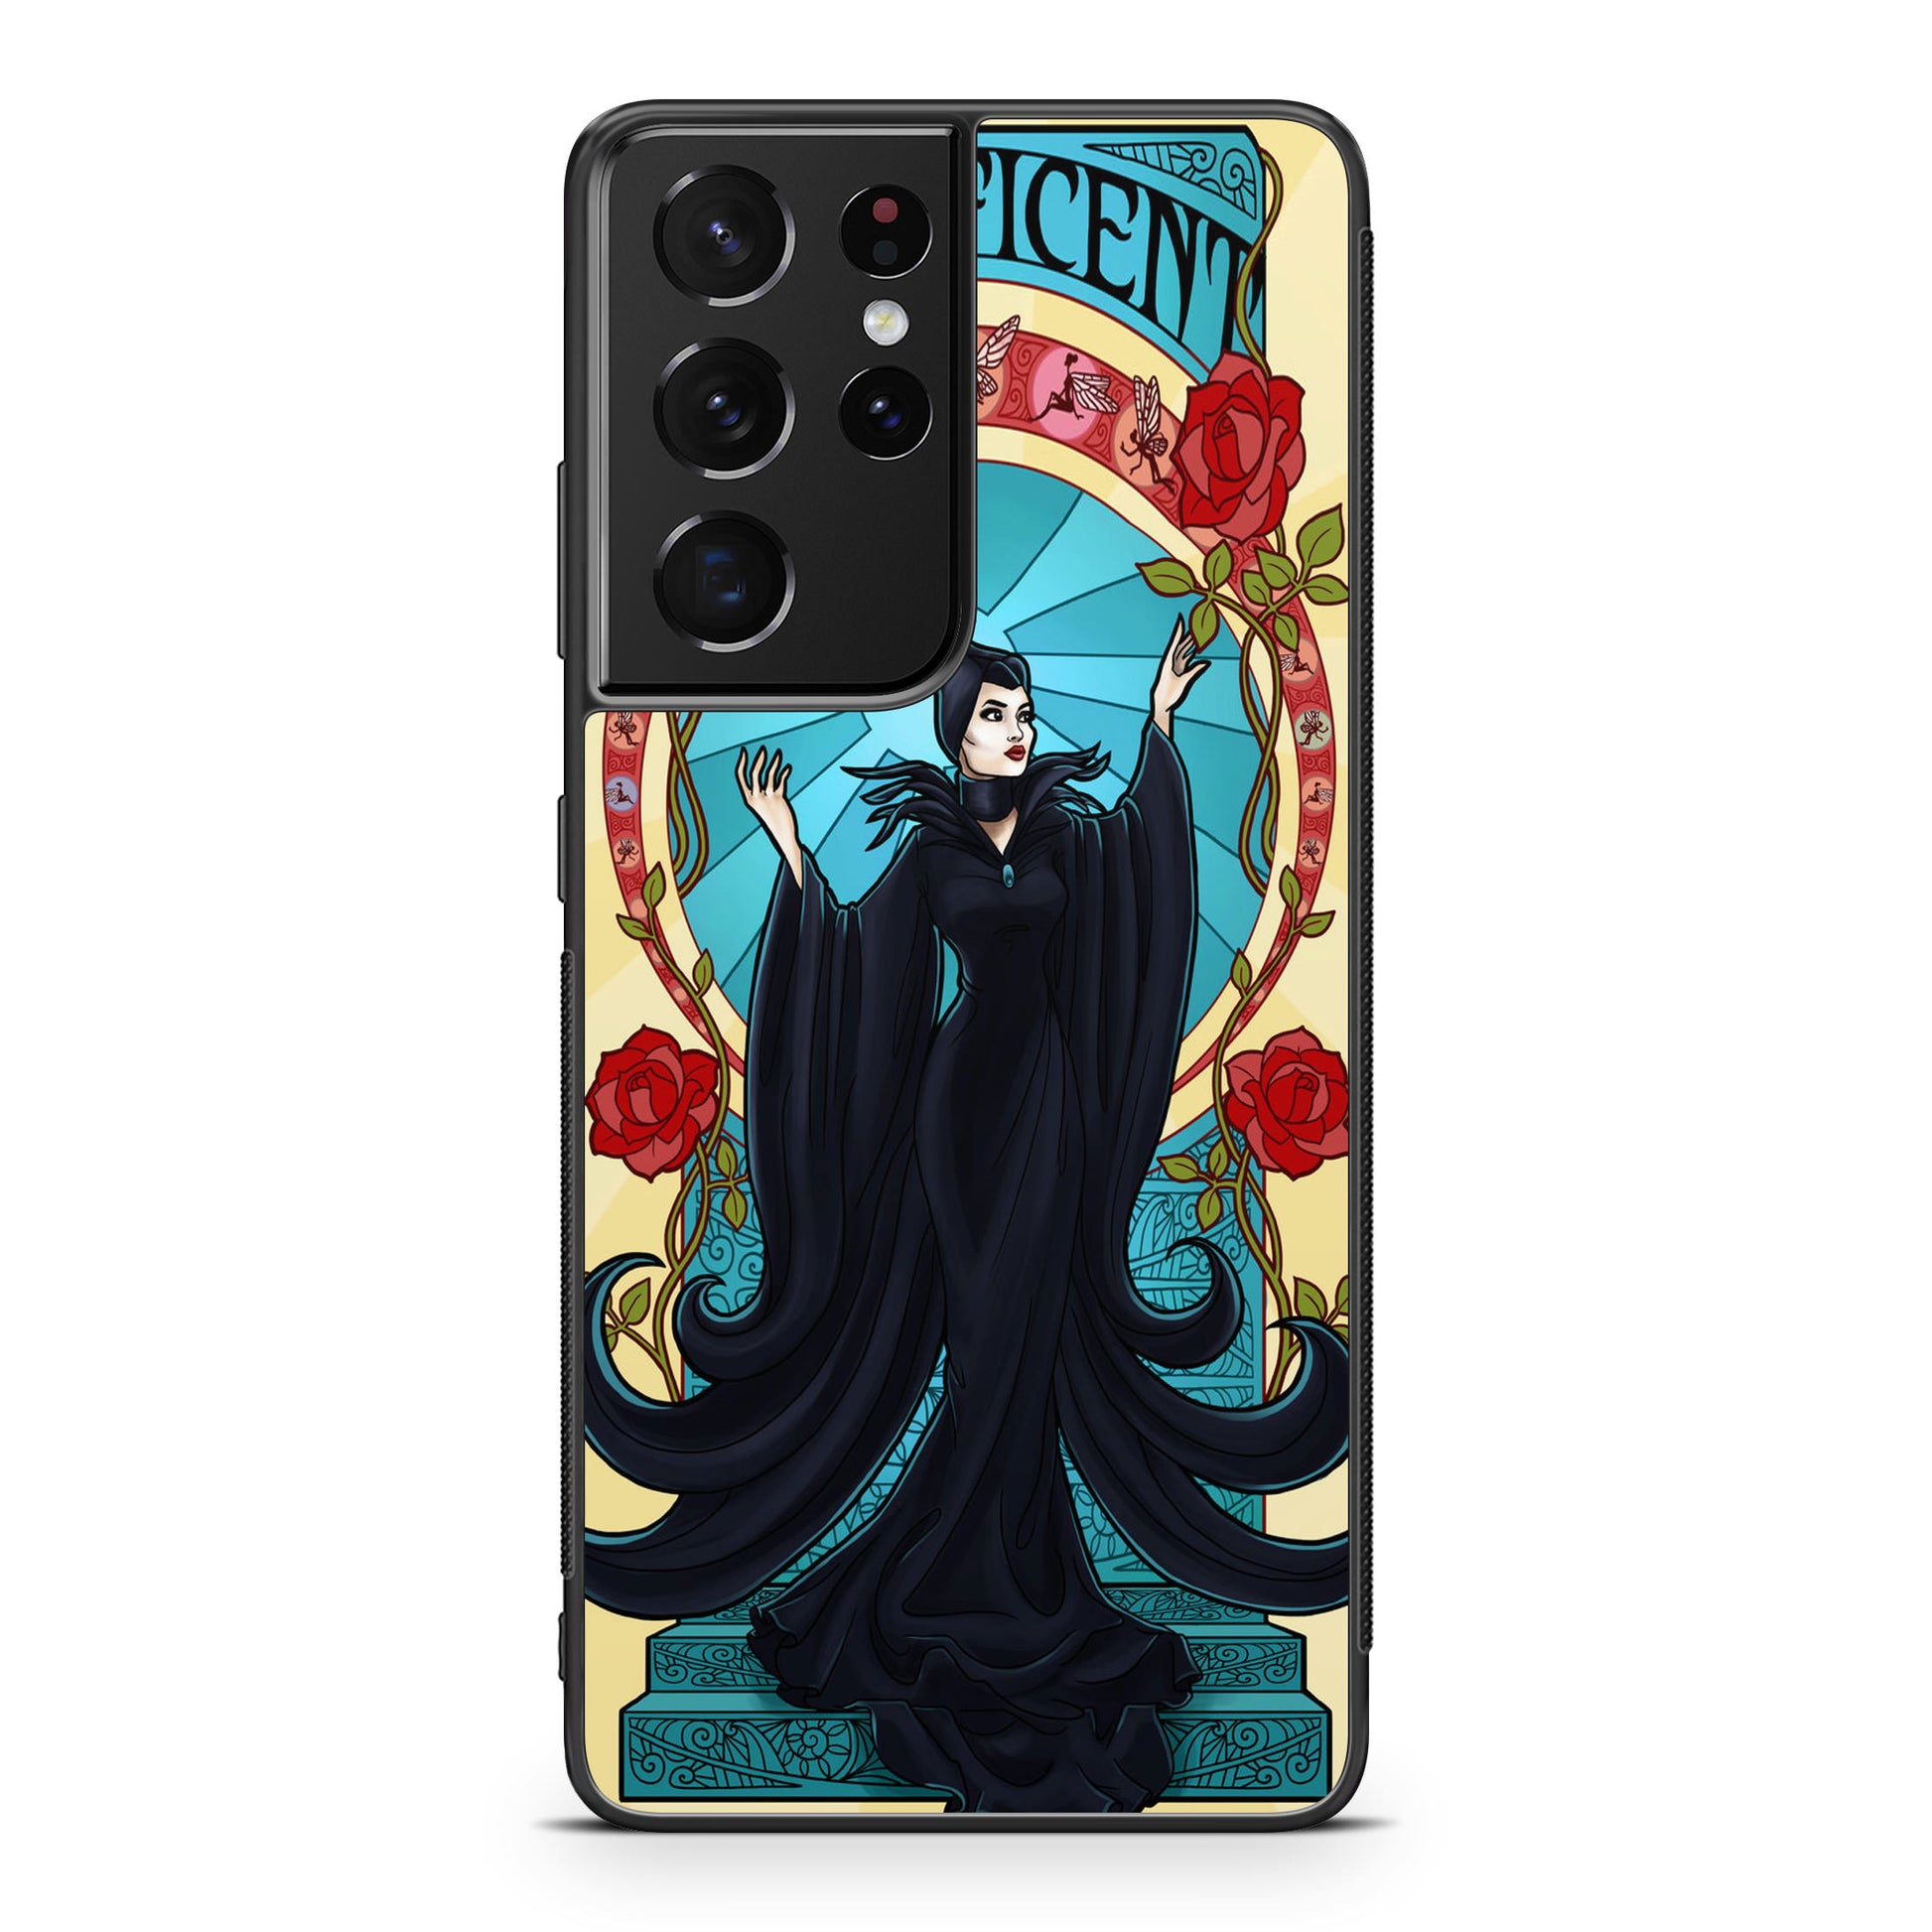 Maleficent With Flower Galaxy S21 Ultra Case